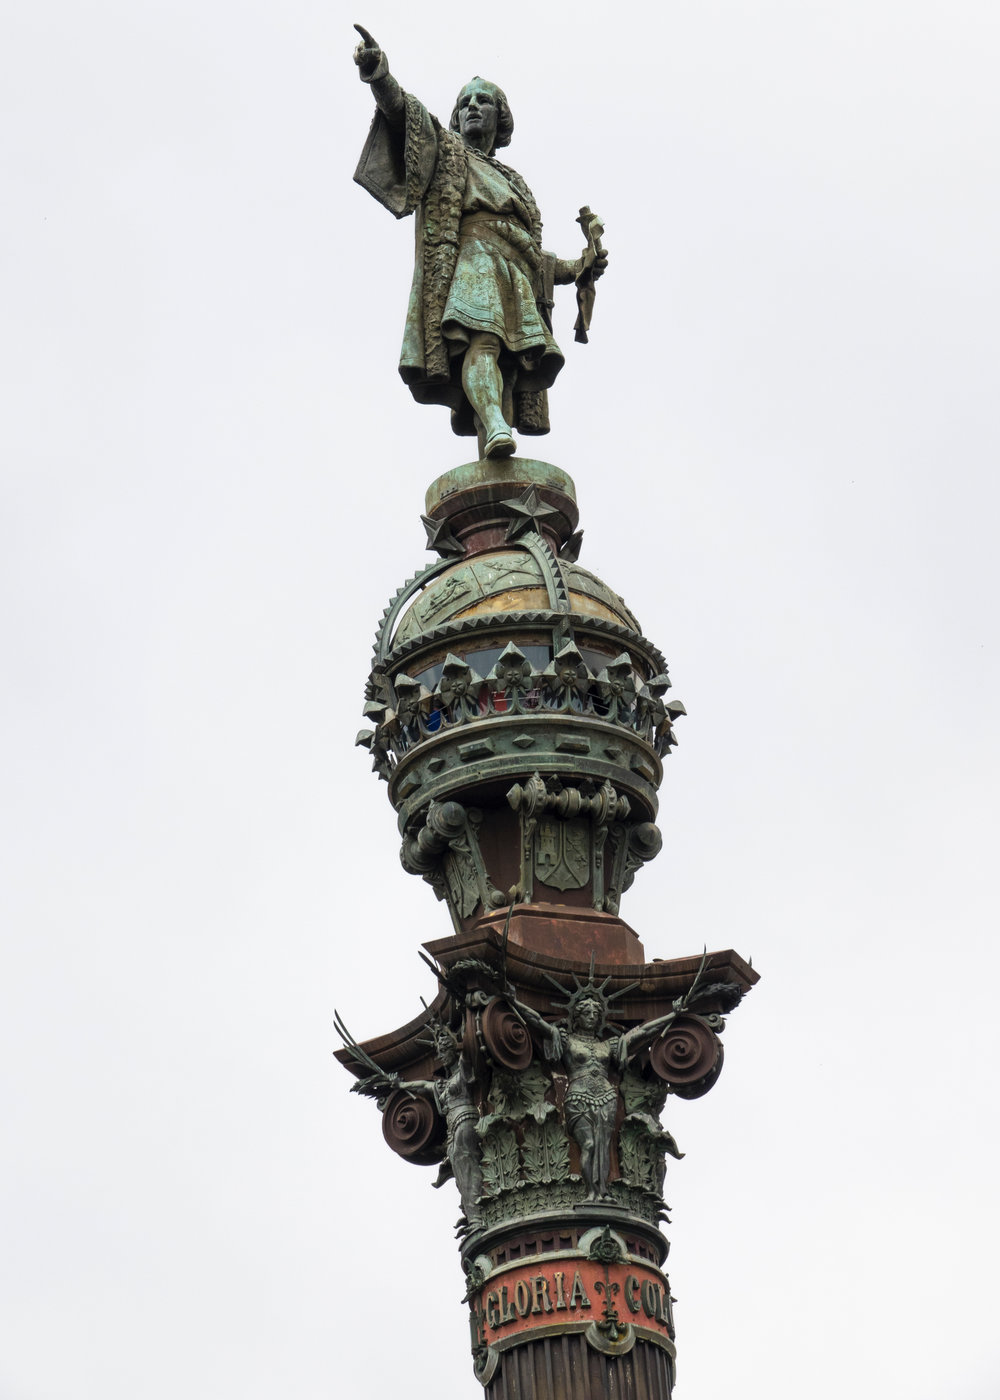  The monument serves as a reminder that Christopher Columbus reported to Queen Isabella I and King Ferdinand V in Barcelona after his first trip to the new continent. 